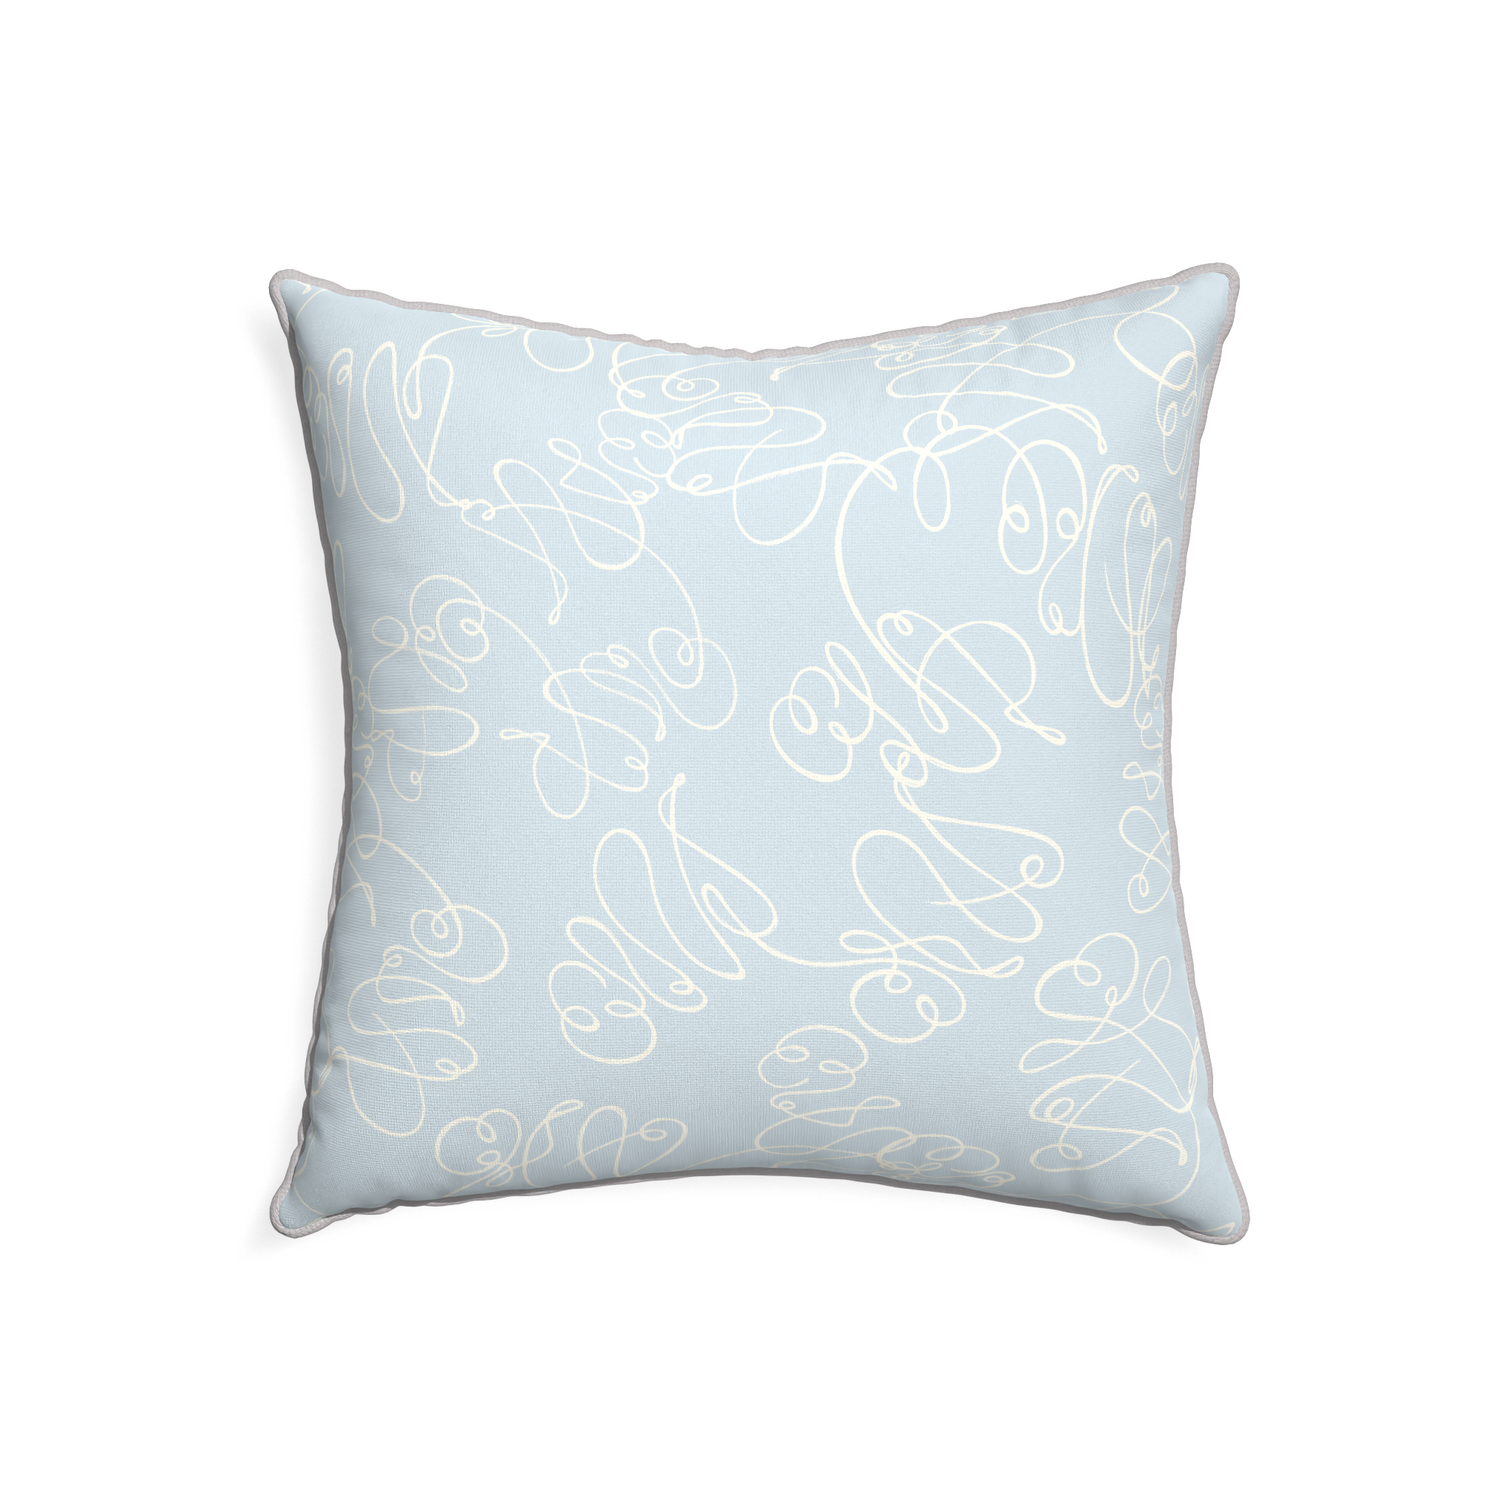 22-square mirabella custom pillow with pebble piping on white background